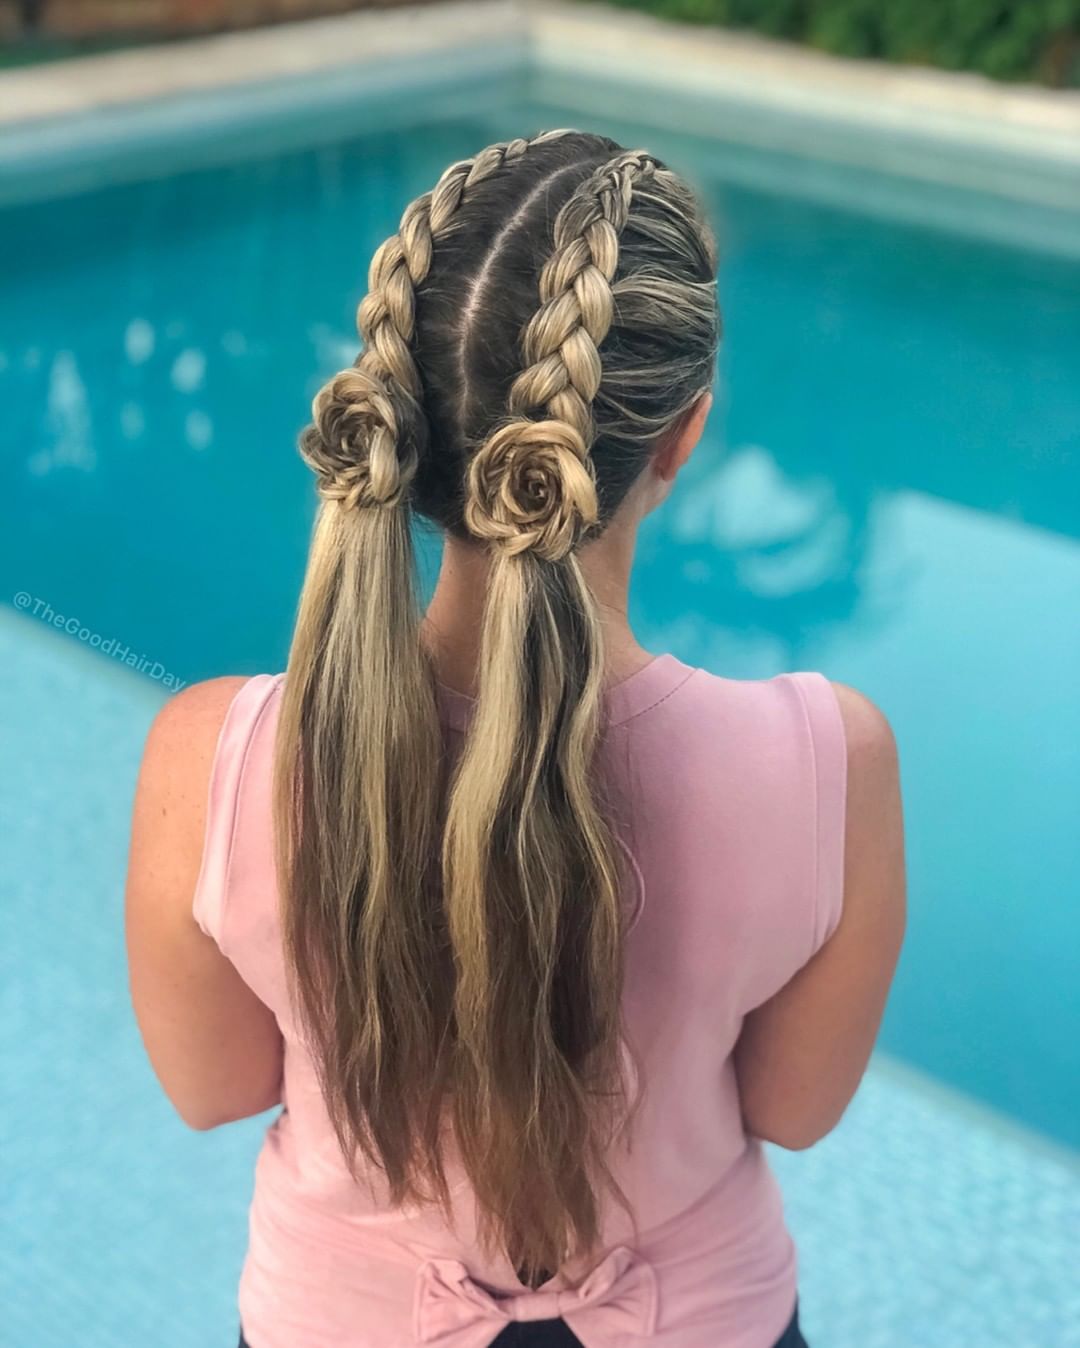 Double Dutch braid pigtails with roses